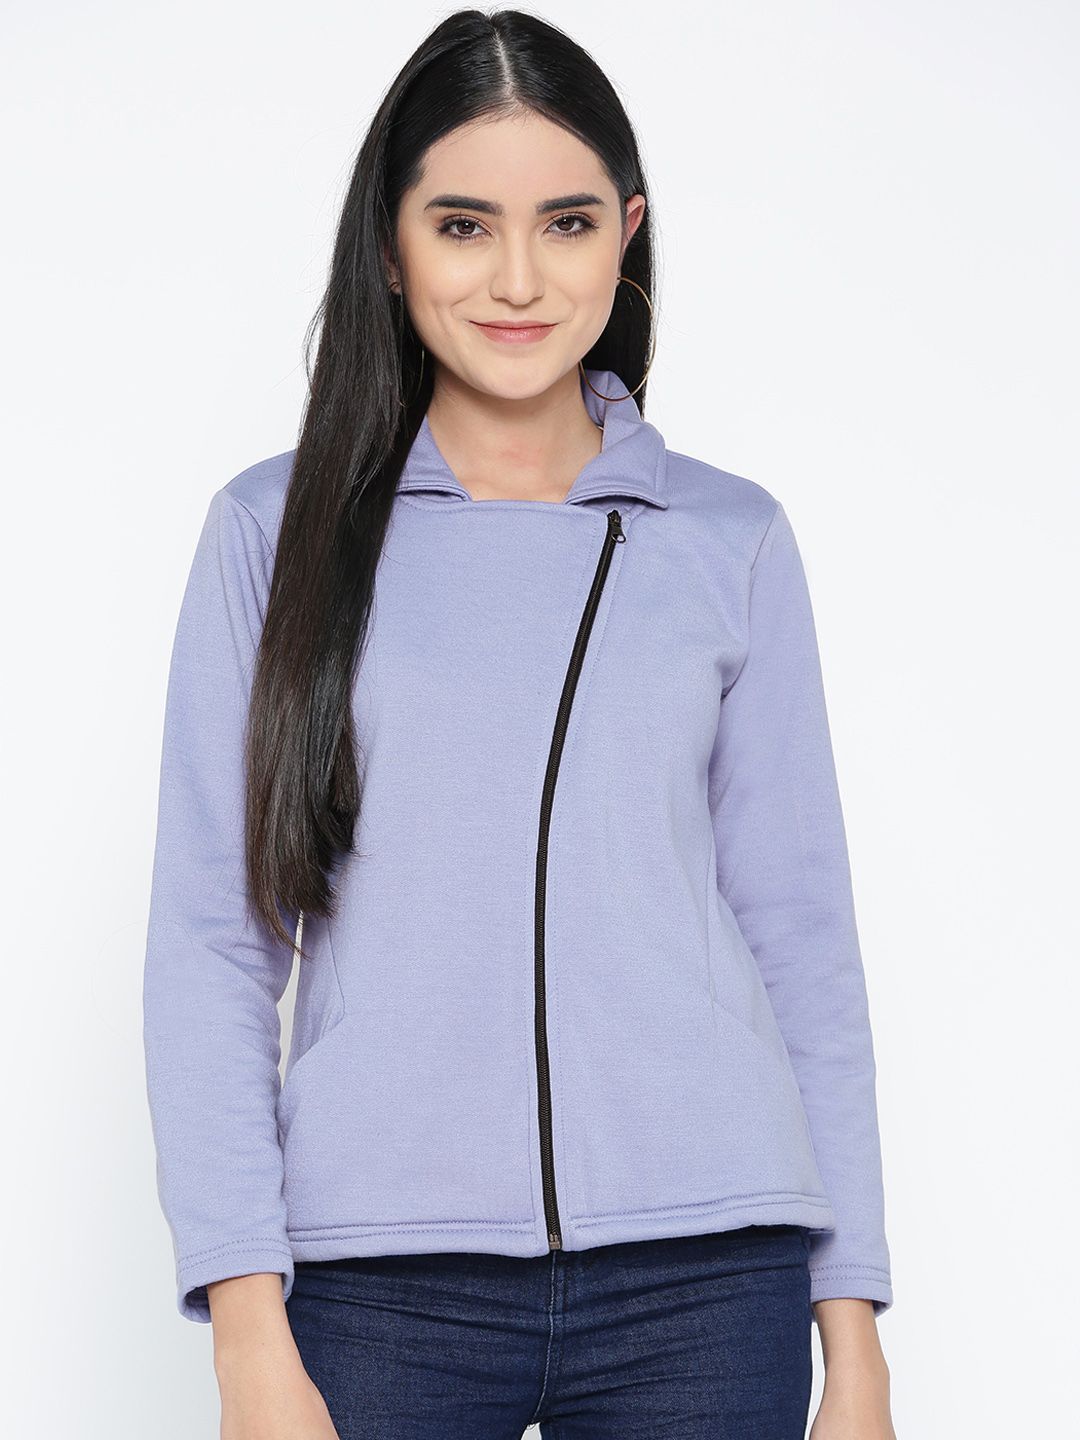 Belle Fille Women Blue Solid Tailored Jacket Price in India